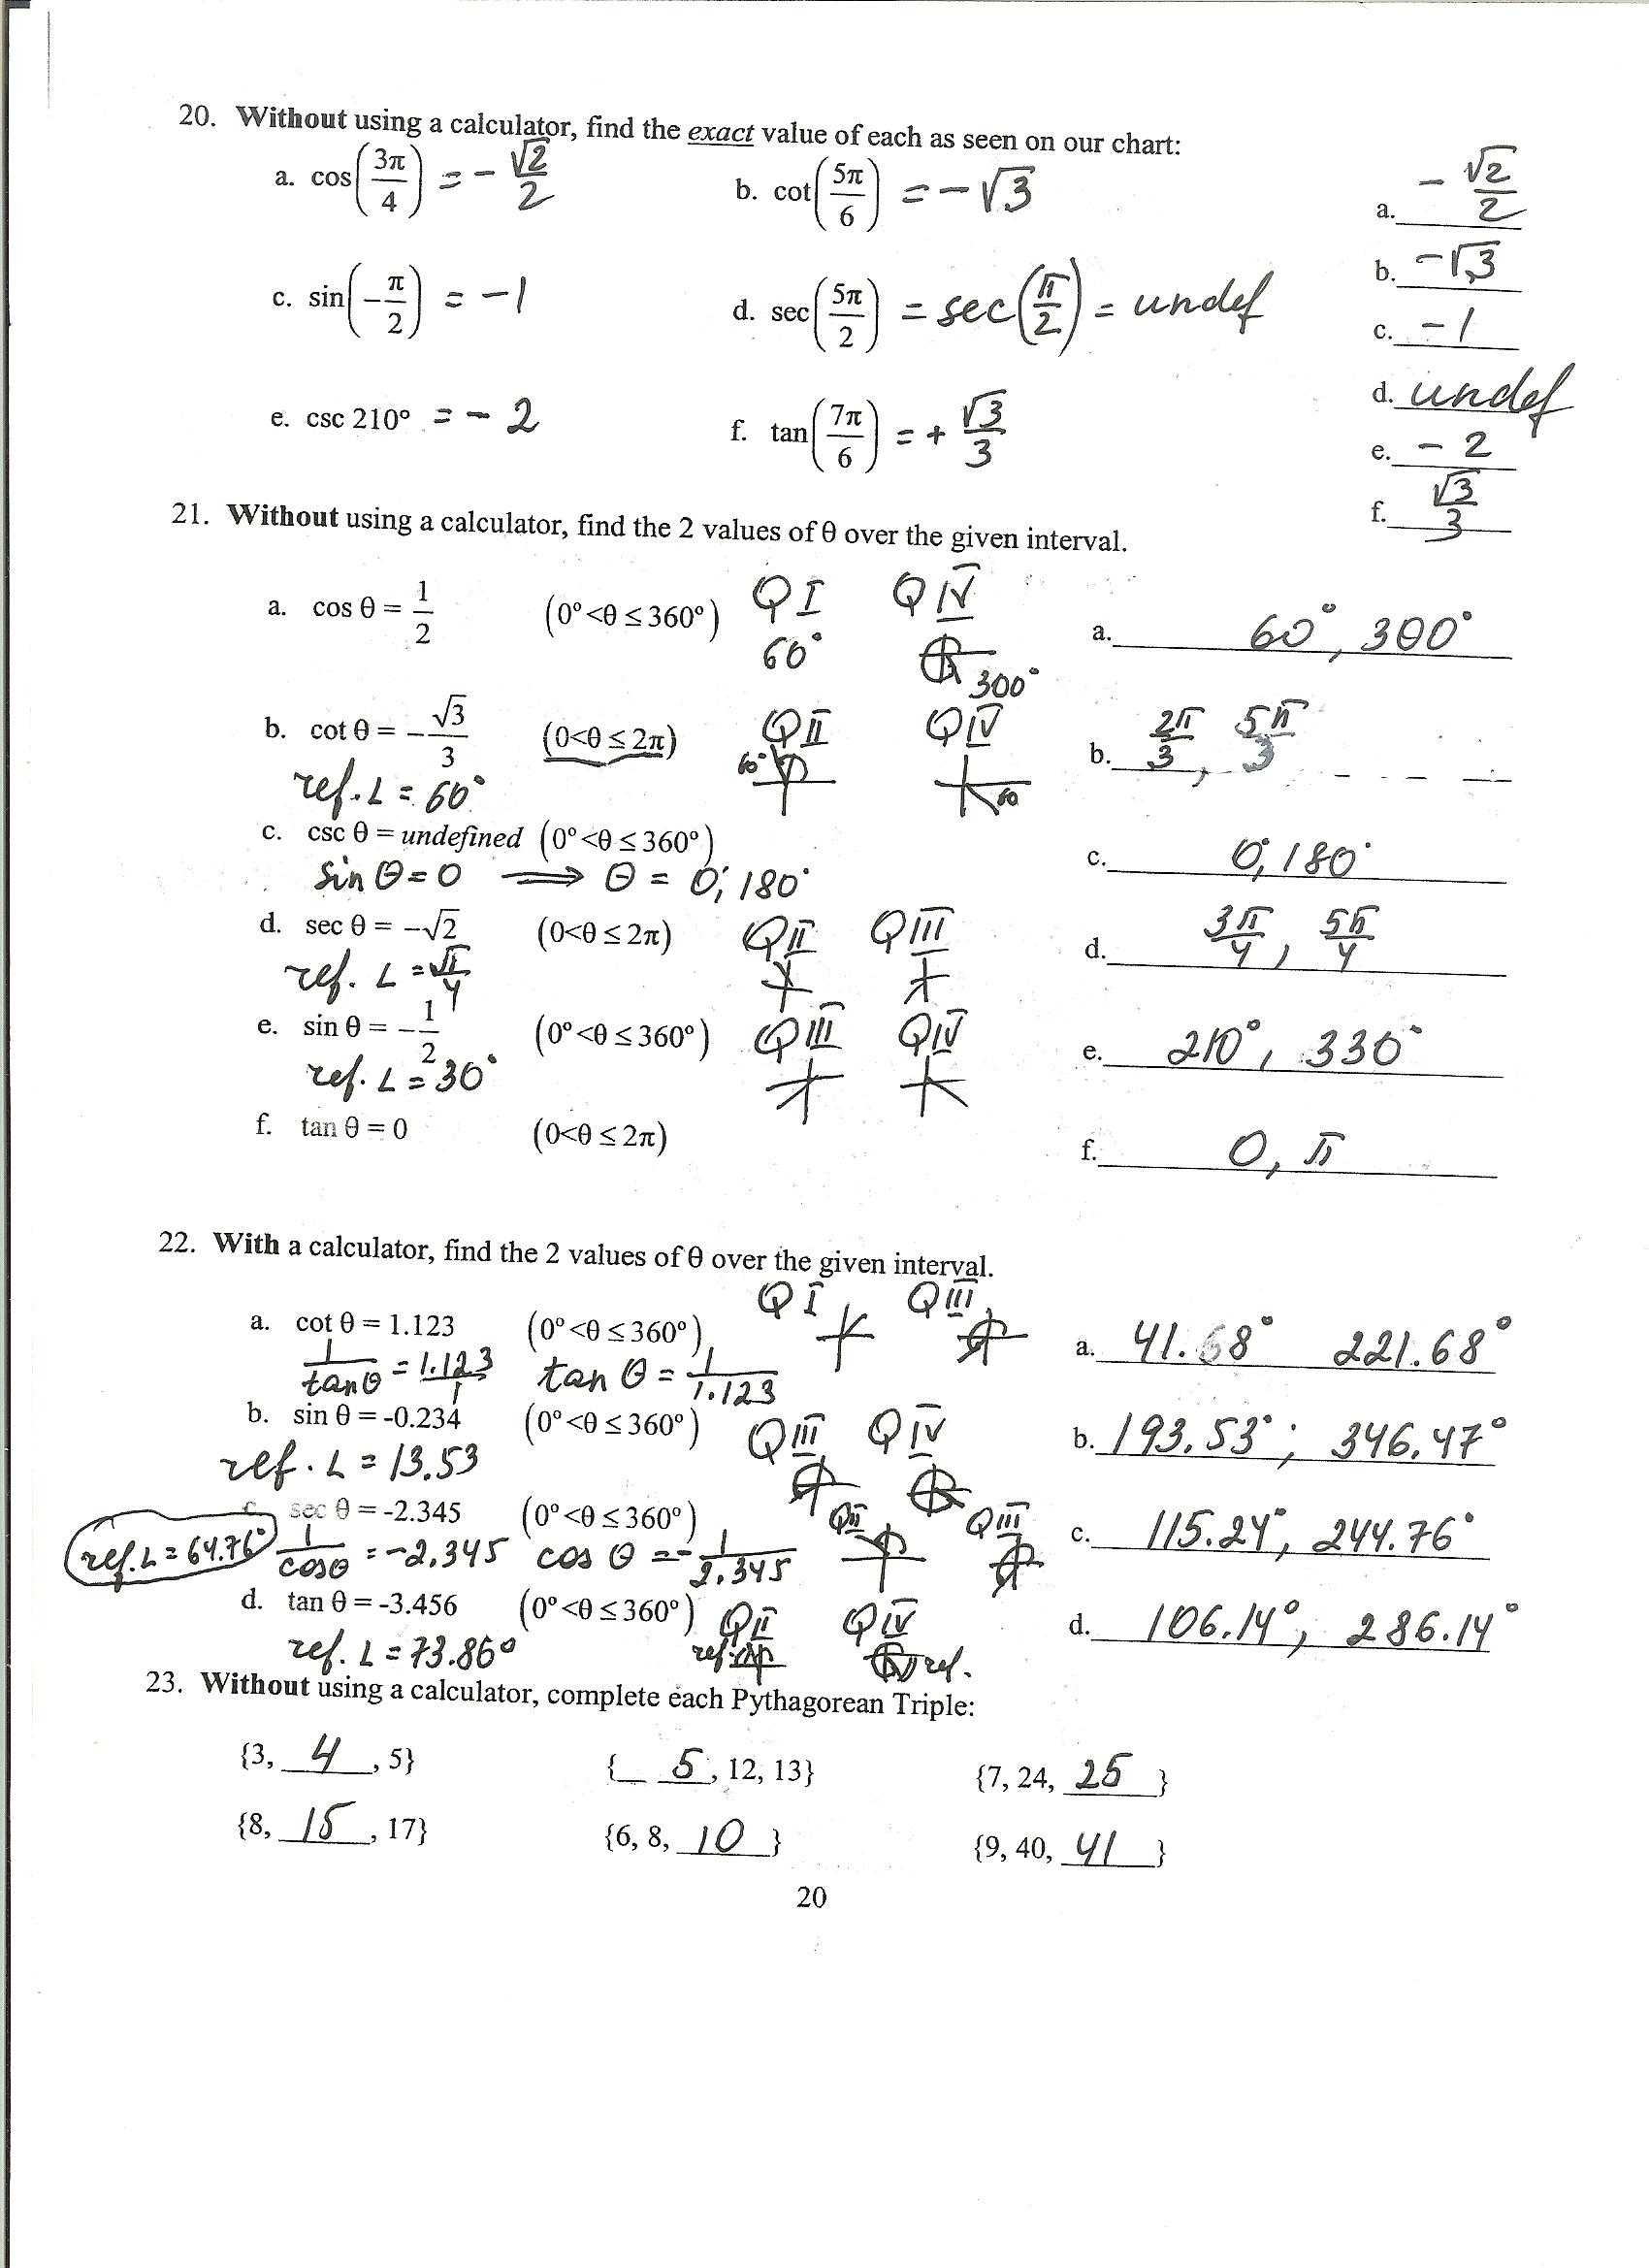 Domain and Range Worksheet 2 Answer Key as Well as Precalculus Honors